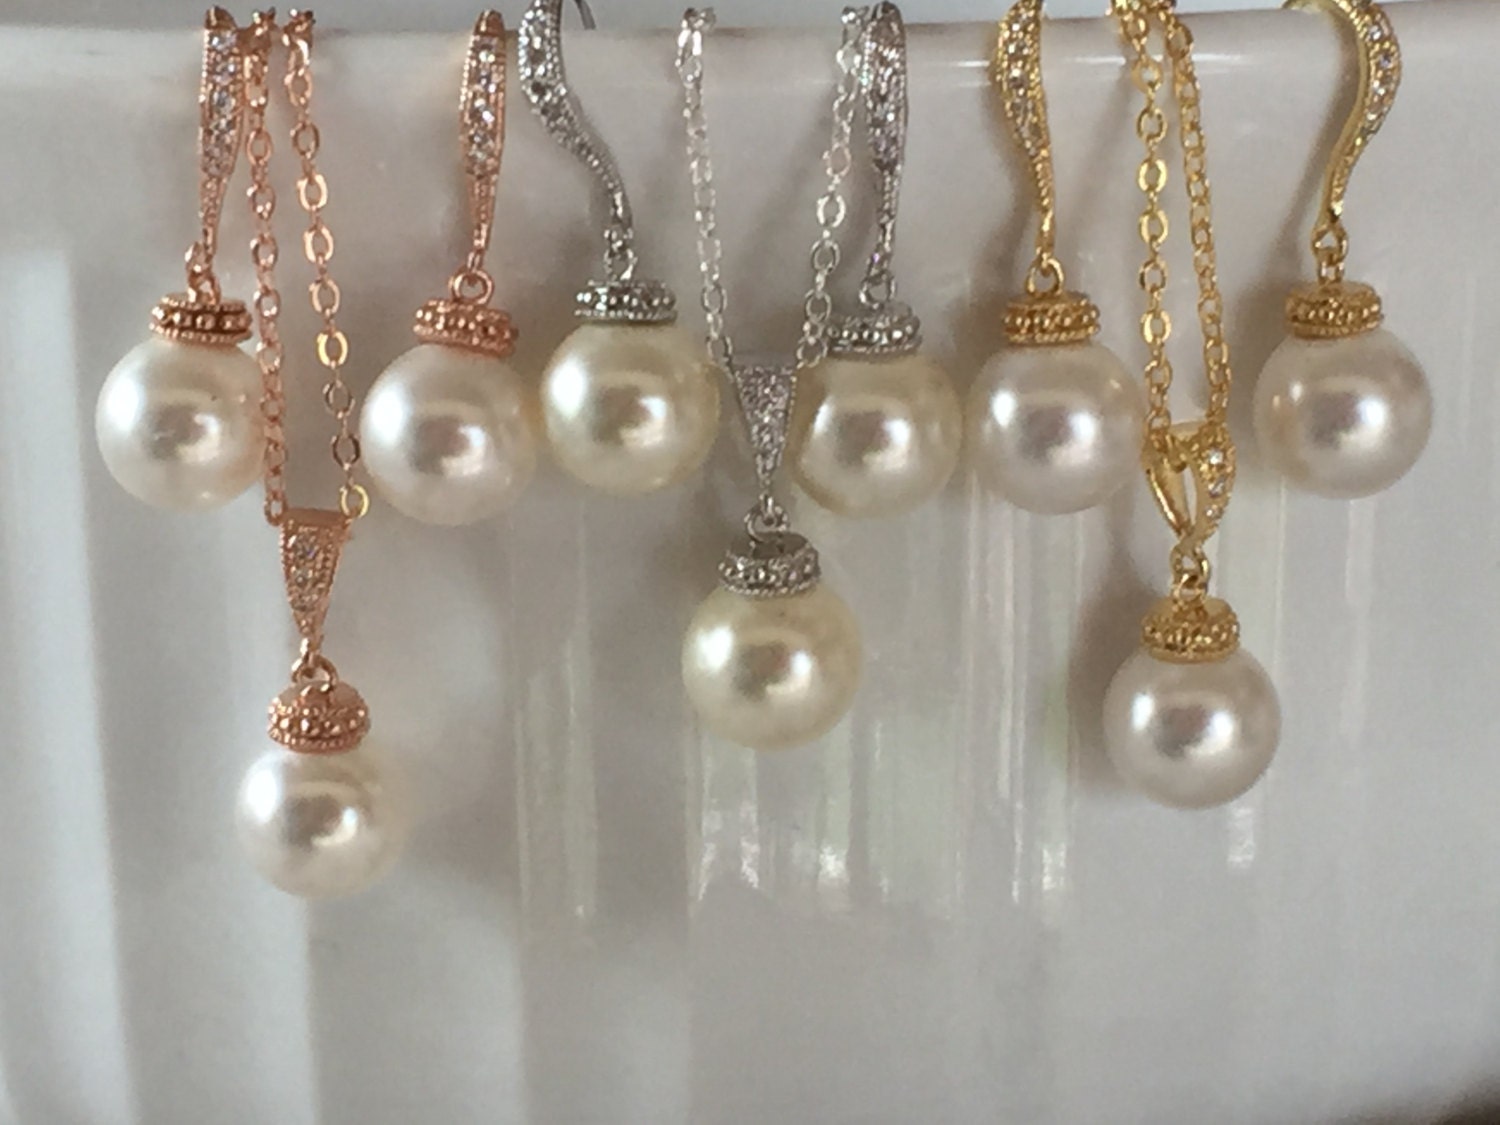 4 sets or more Pearl necklace for bridesmaid gifts ,Bridesmaid jewelry sets, necklace and earrings,  wedding jewelry already discounted